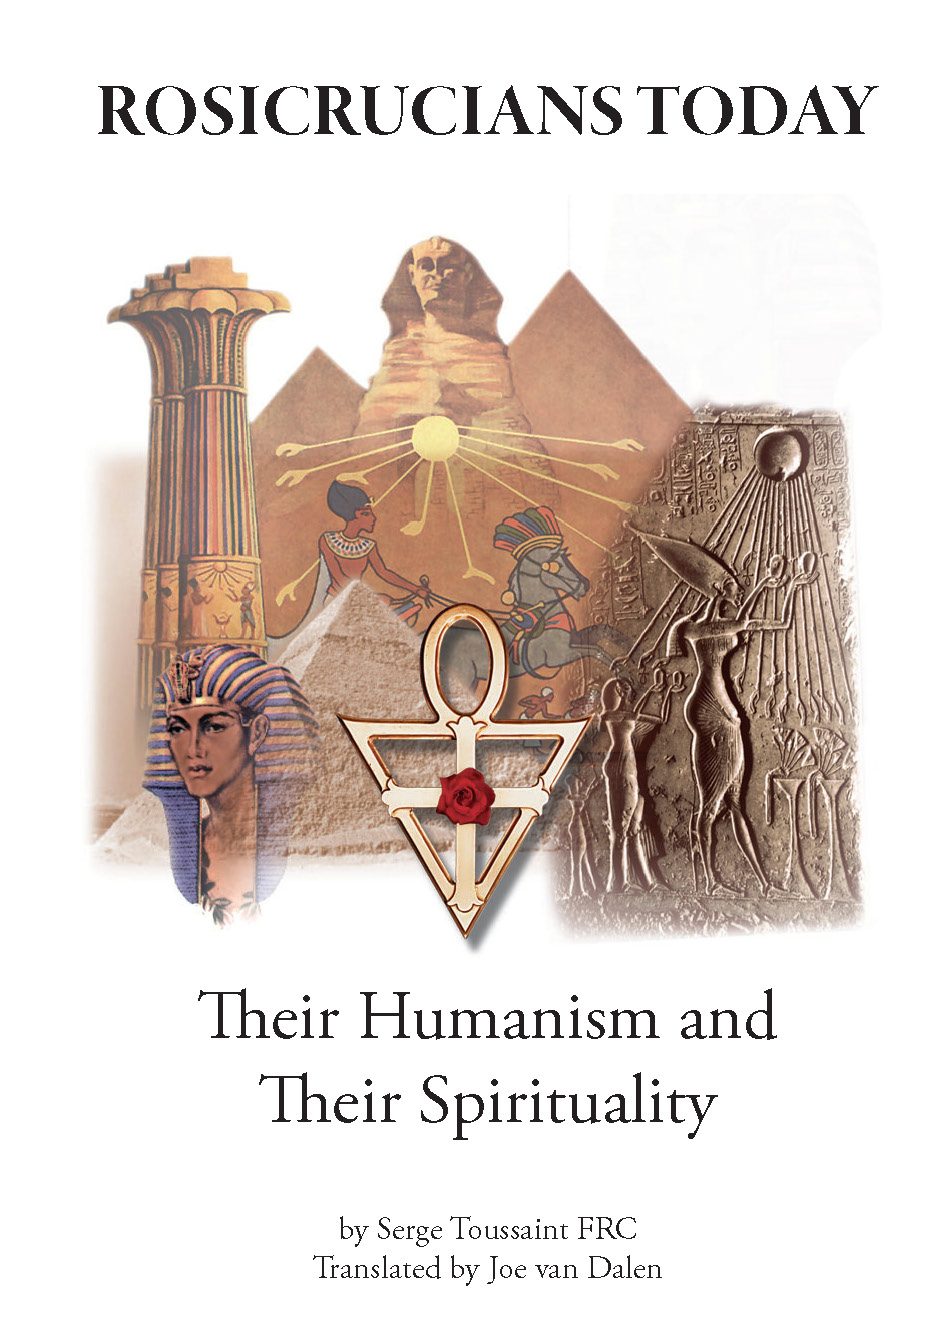 E Book - Rosicrucians Today, Their Humanism &amp; Their Spirituality